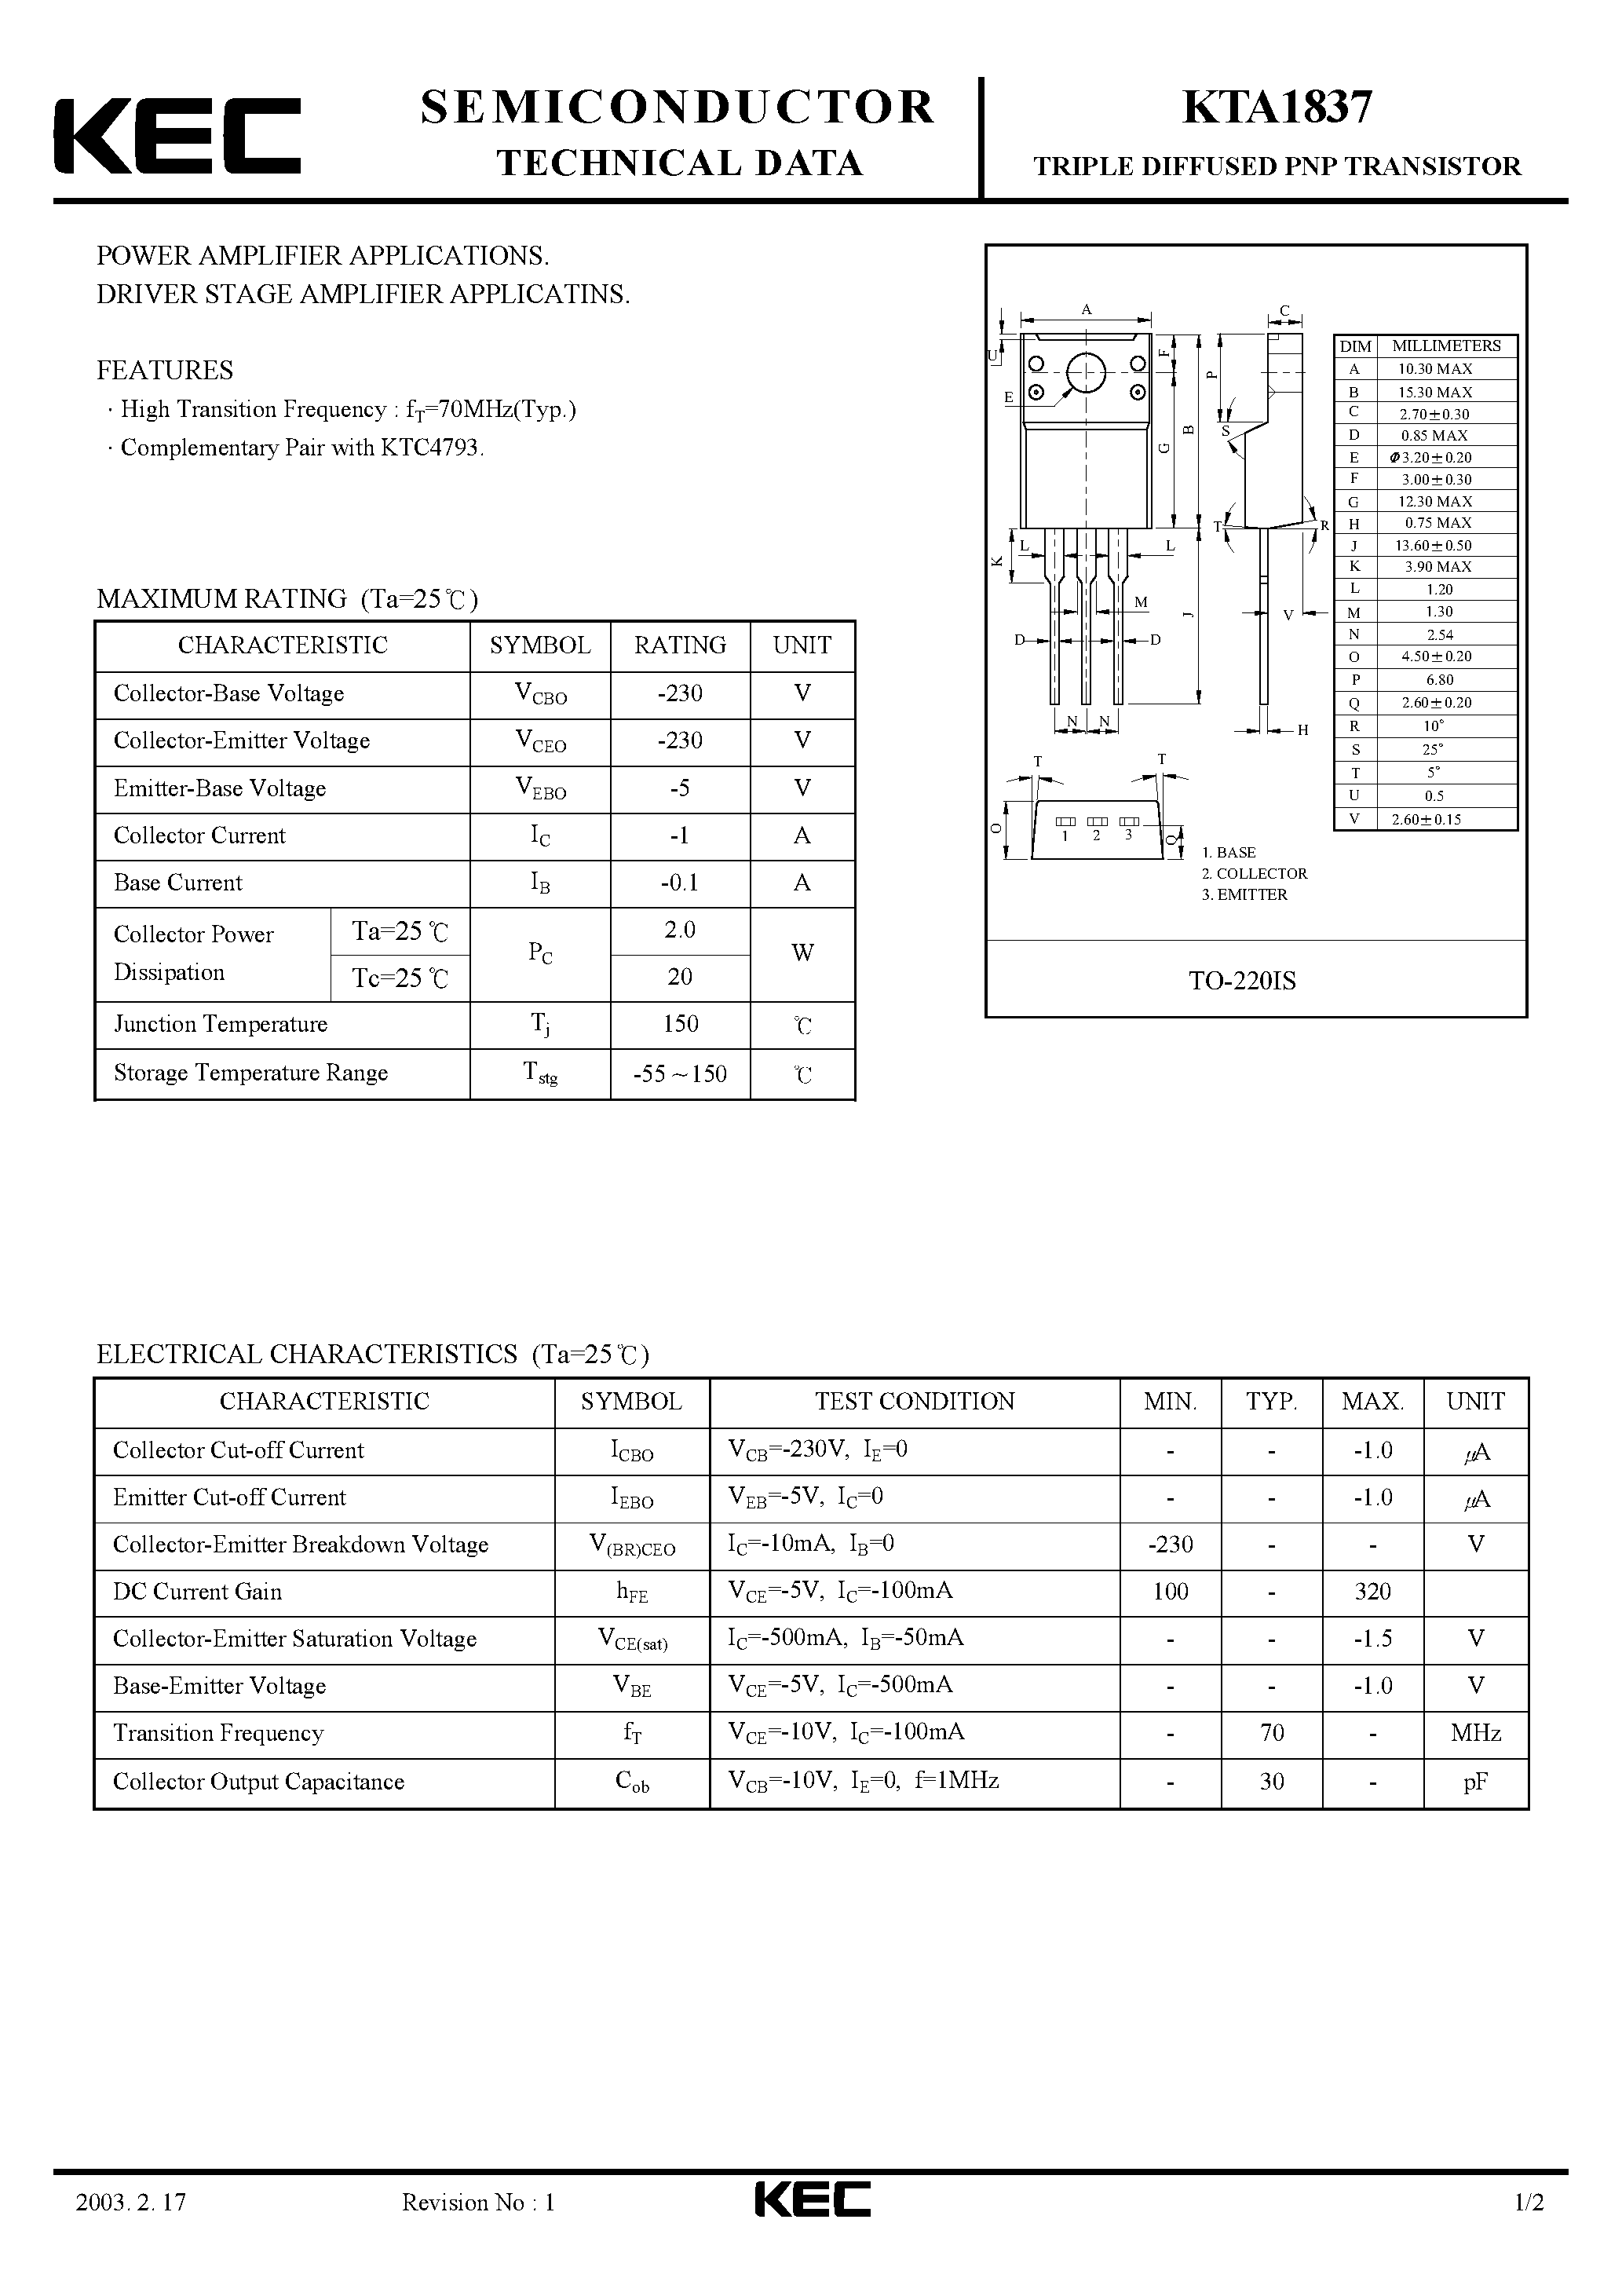 Datasheet KTA1837 - TRIPLE DIFFUSED PNP TRANSISTOR(POWER AMPLIFIER DRIVER STAGE AMPLIFIER) page 1